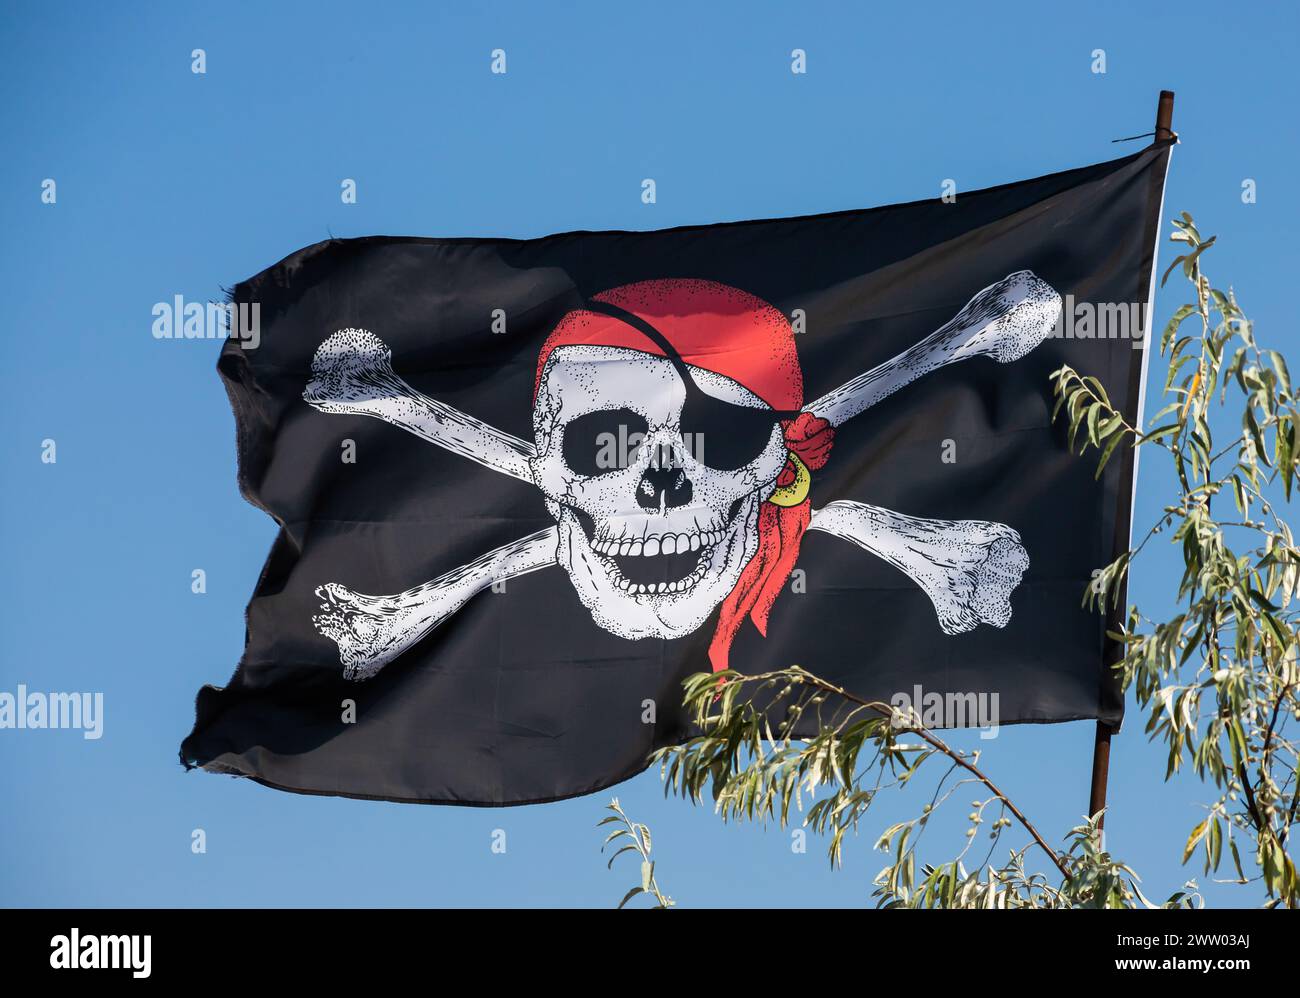 A skull and cross bones pirate flag waving in the wind. Stock Photo